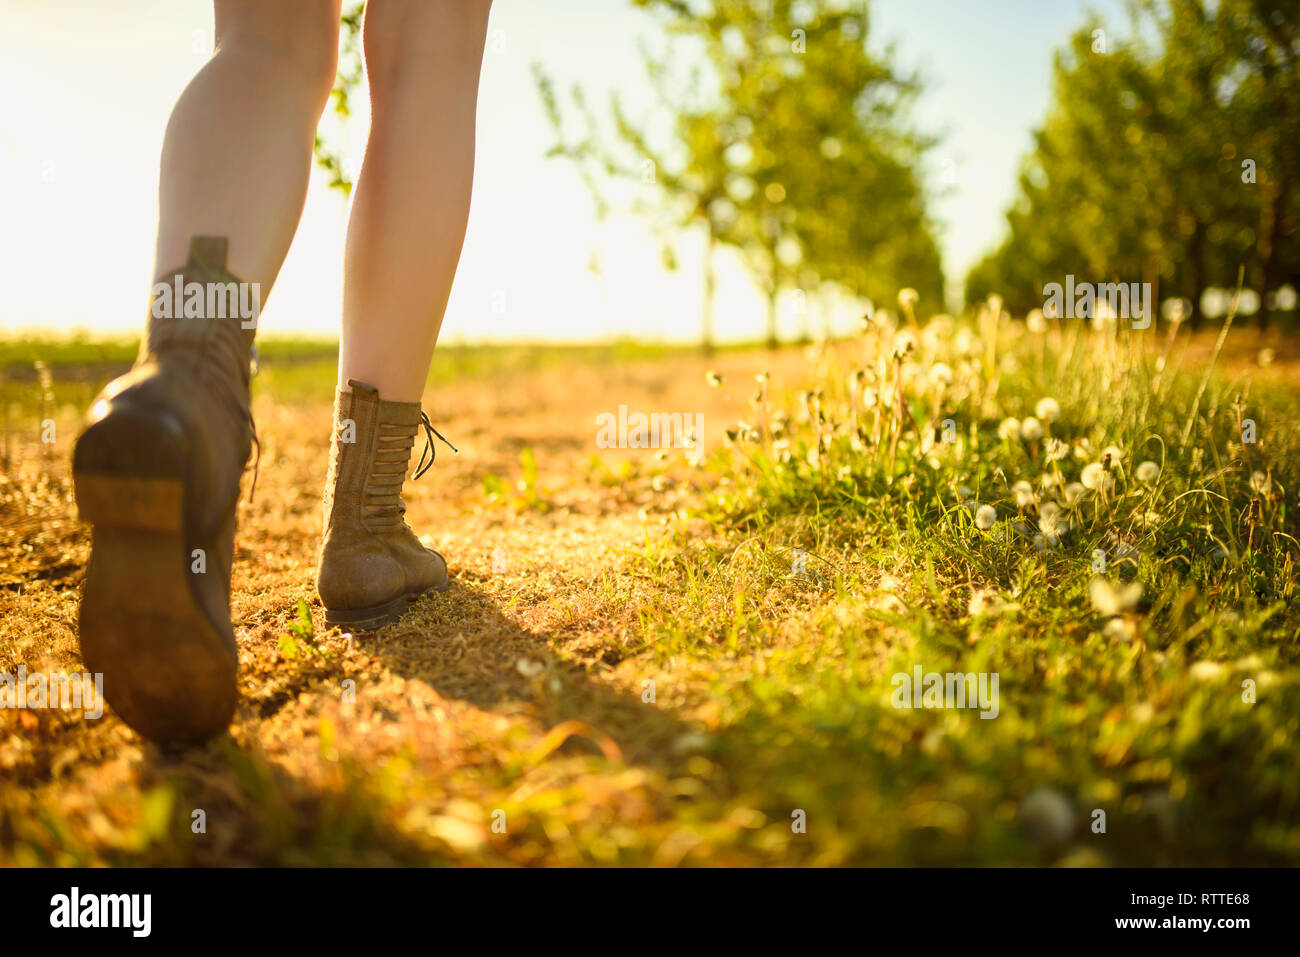 View on legs and shoes of walking girl in the green orchard by the path, during sunny day. Stock Photo